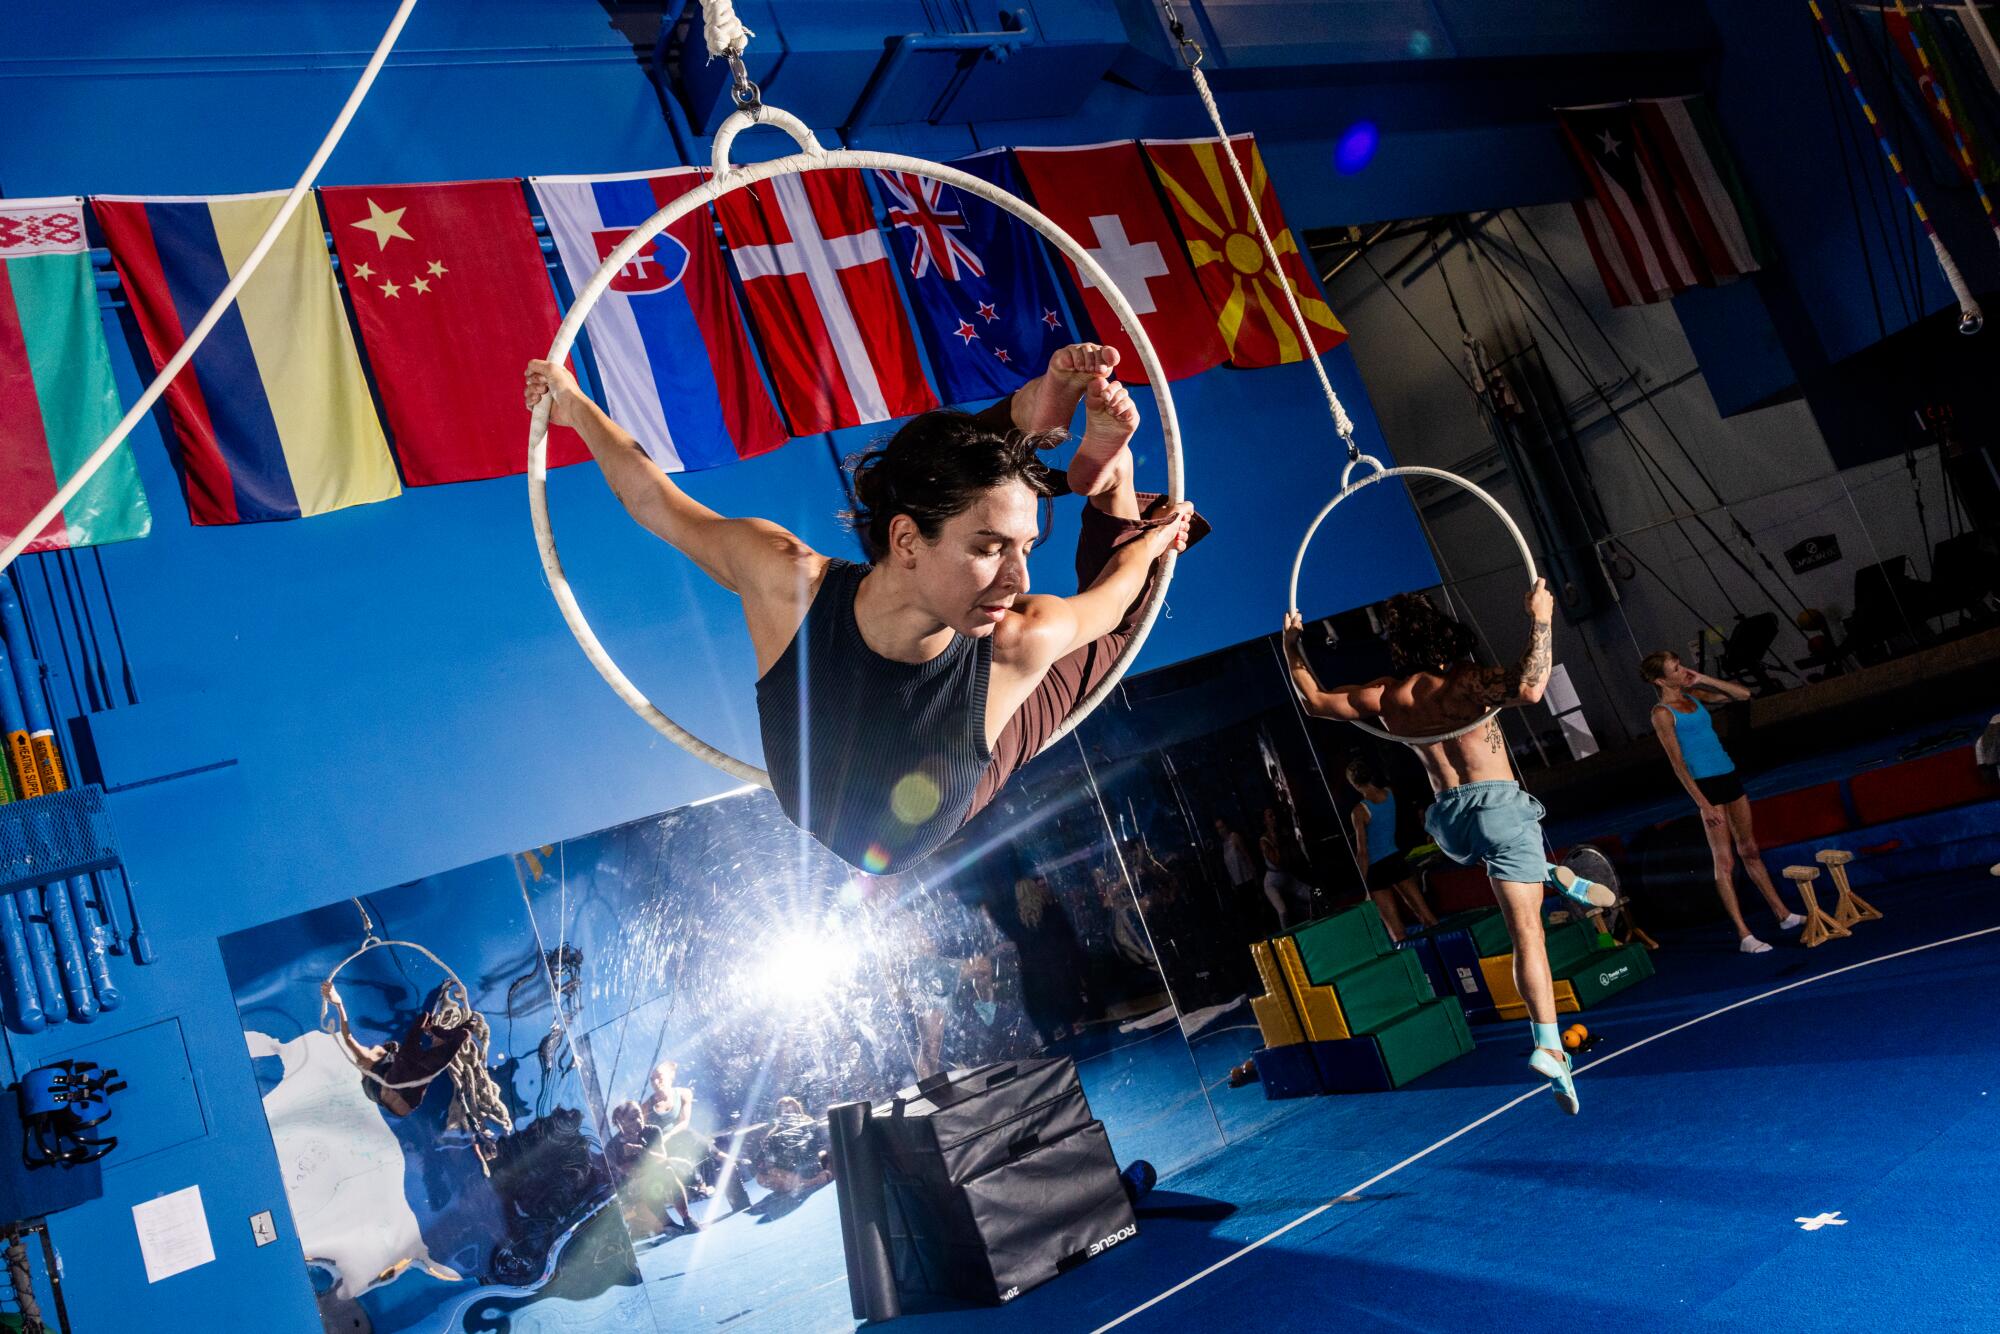 Cirque du Soleil cast members train at the gym, which has flags on the walls. 